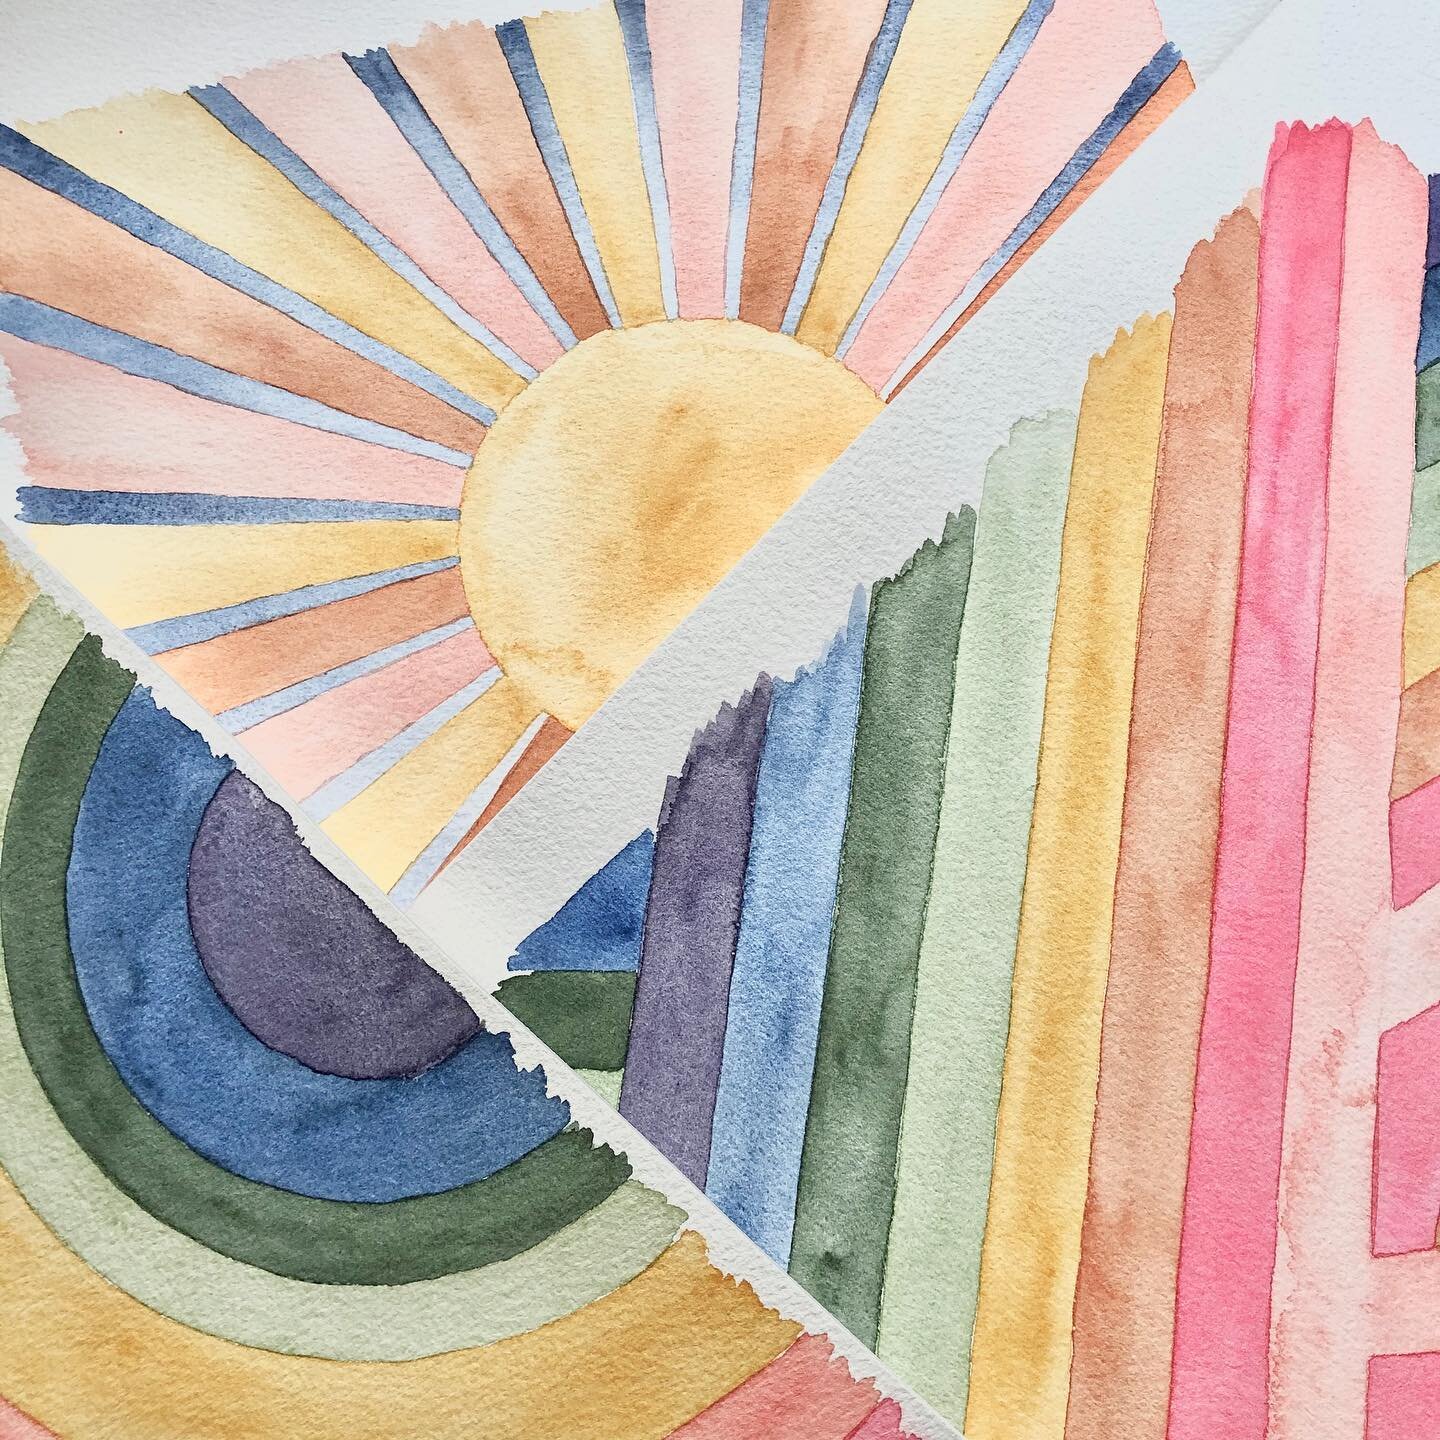 It&rsquo;s been raining here in LA, so naturally I&rsquo;ve been inclined to paint ☀️ and 🌈 🙈 #watercolor #watercolorpainting #watercolorart #rainbow #sunshine #allthecolors #art #textiledesign #surfacedesign #surfacepatterndesign #textiledesigner 